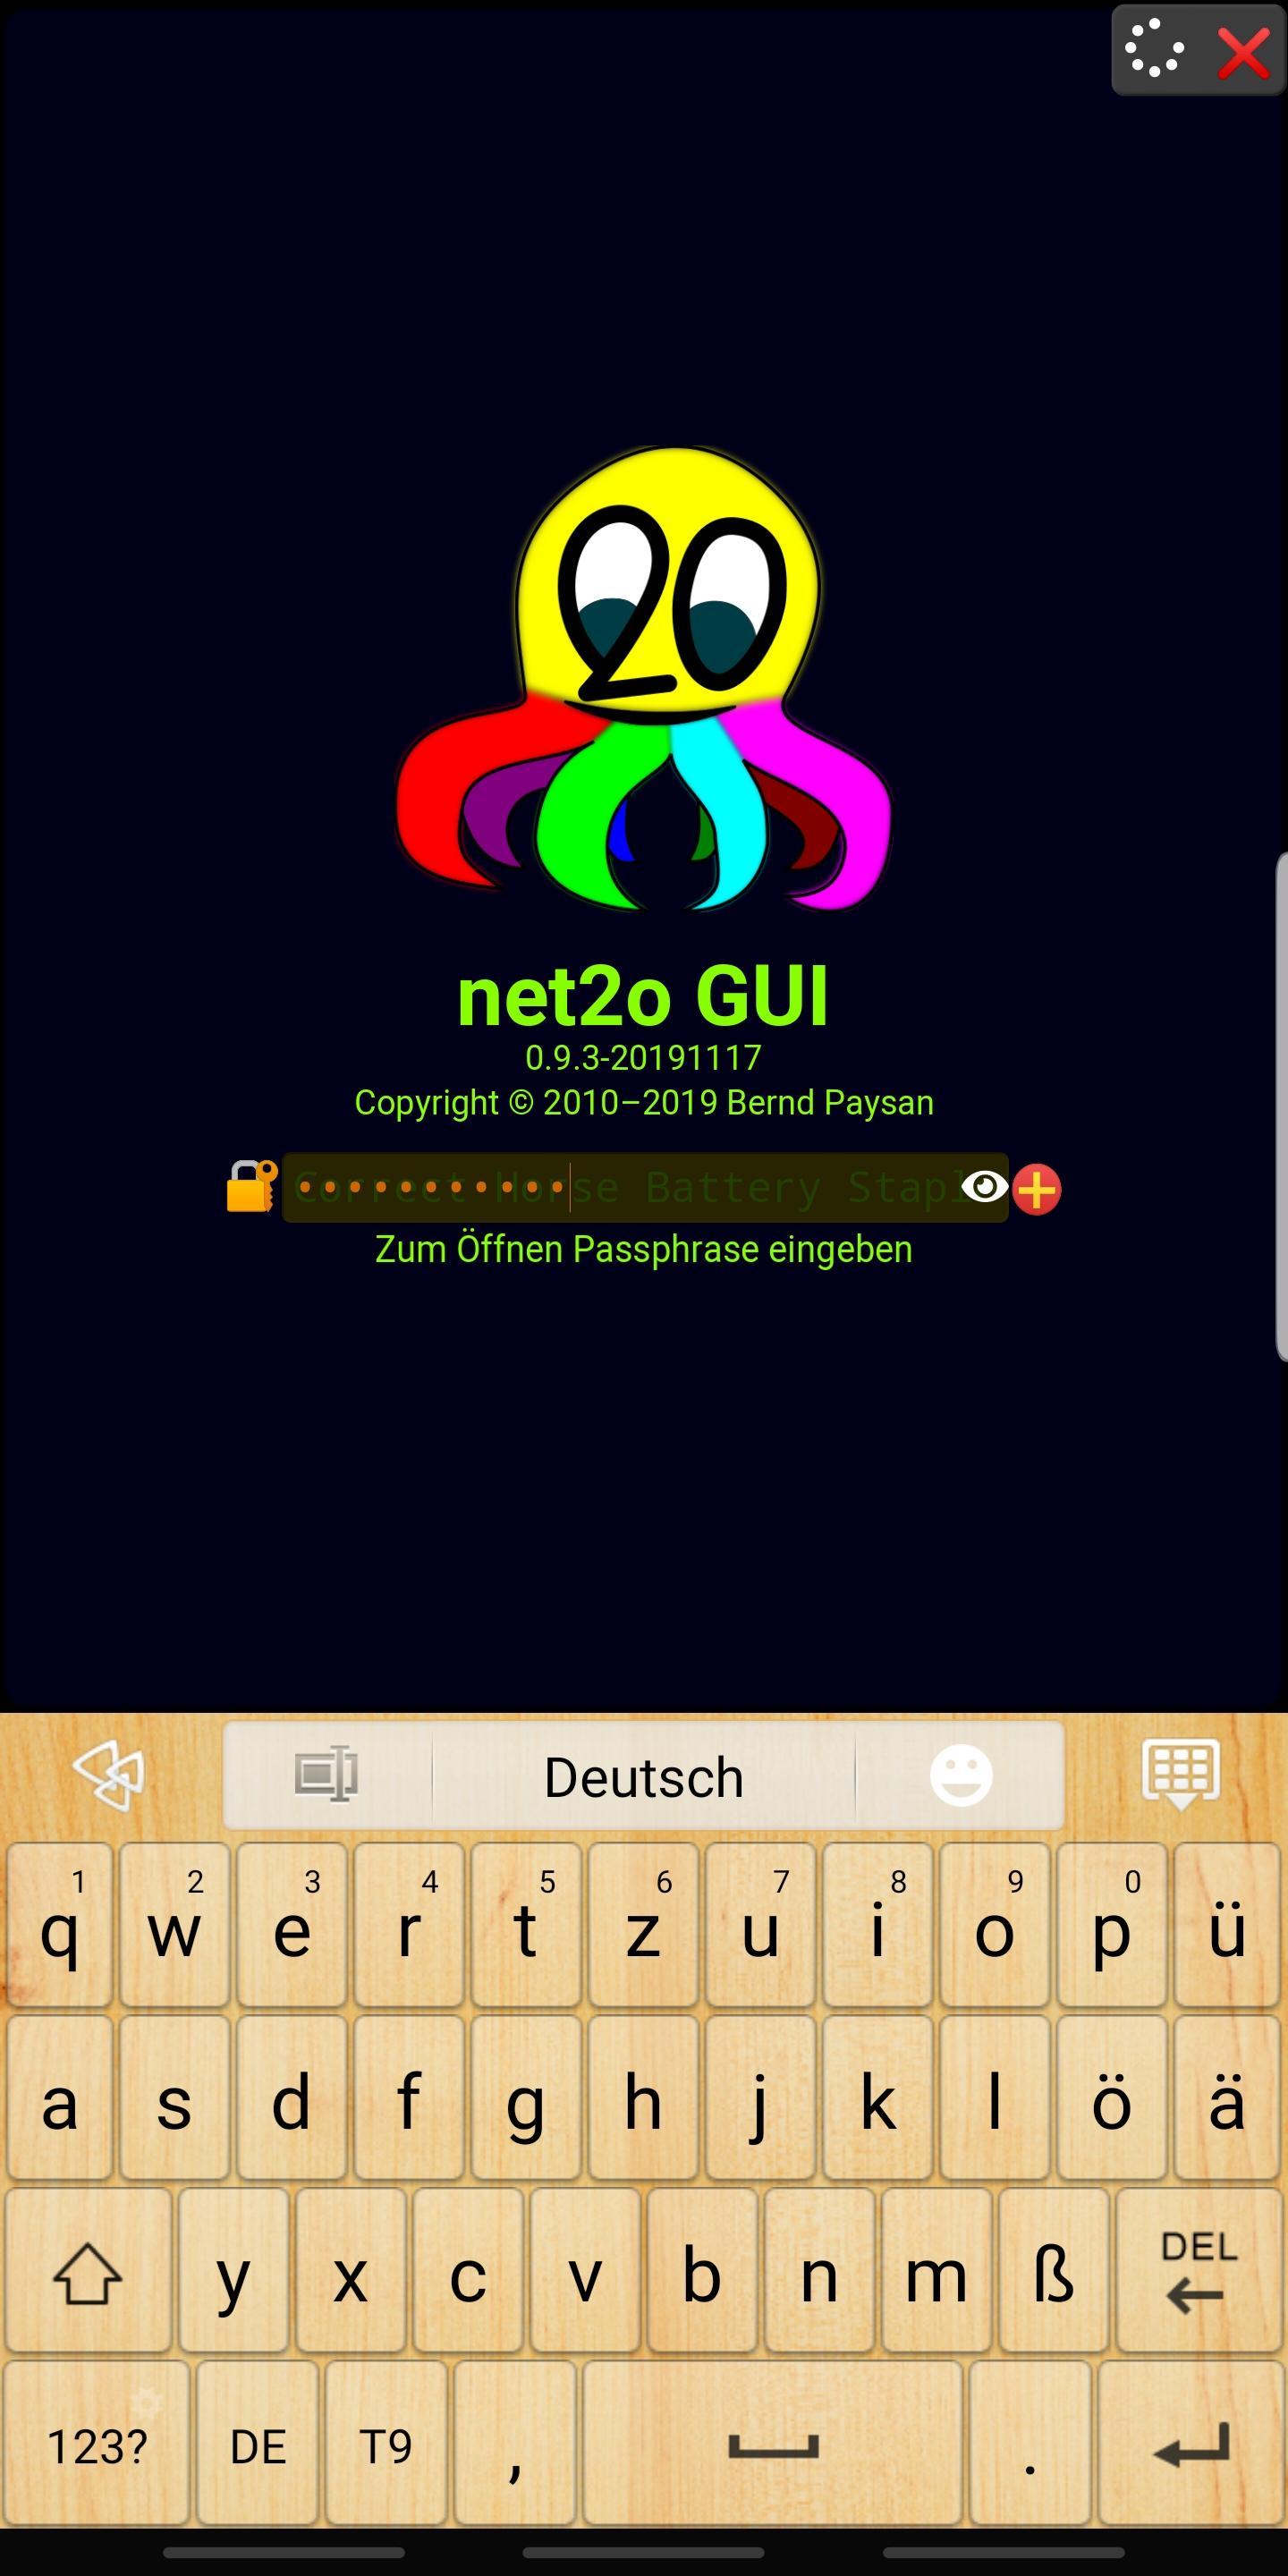 gforth - GNU Forth for Android 0.7.9_20210520 Screenshot 7